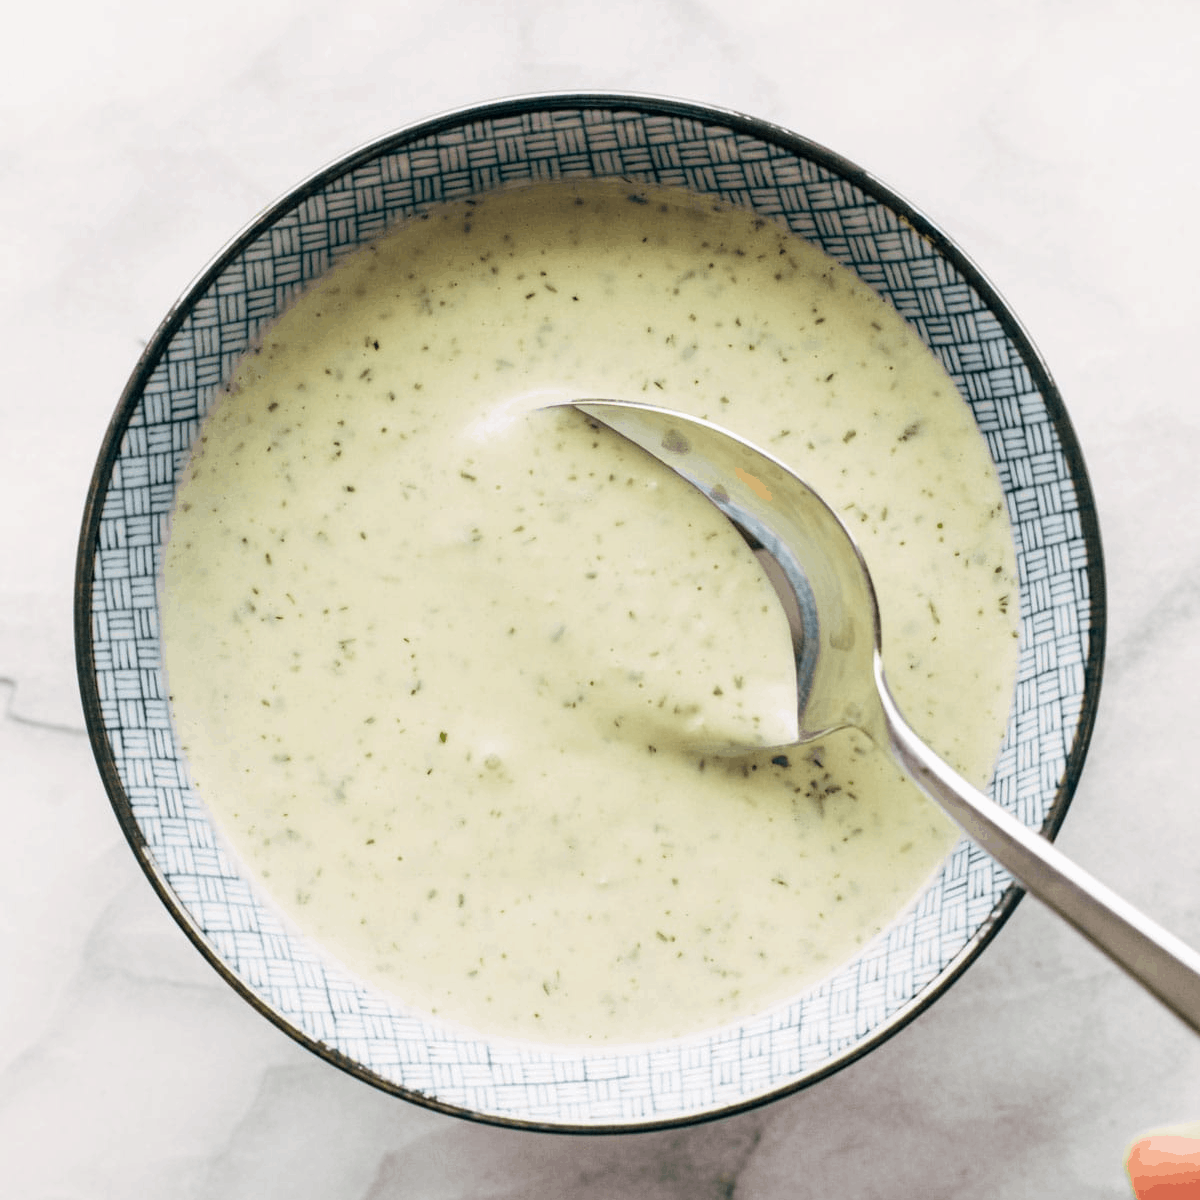 Jalapeno ranch in a bowl with a spoon.